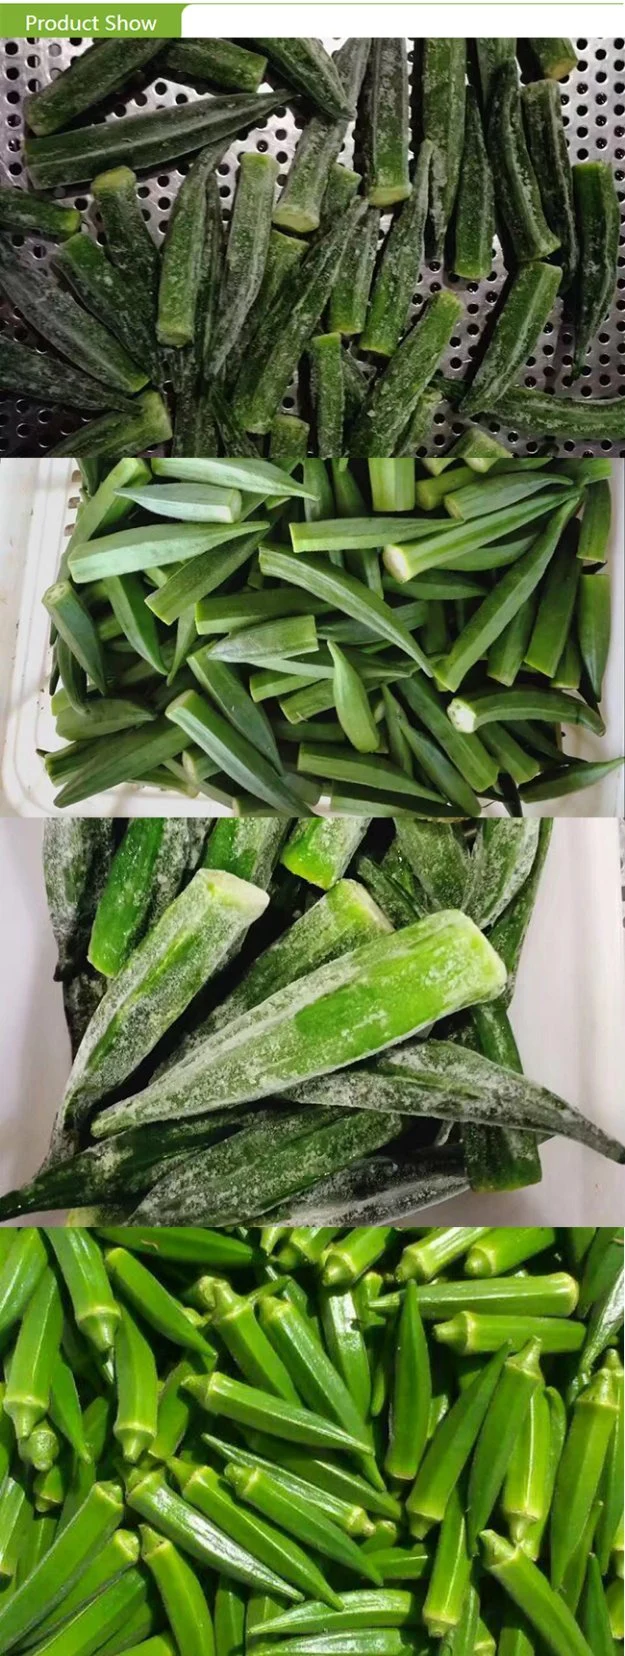 China Organic Deep Quick Frozen Whole Okra with High Quality